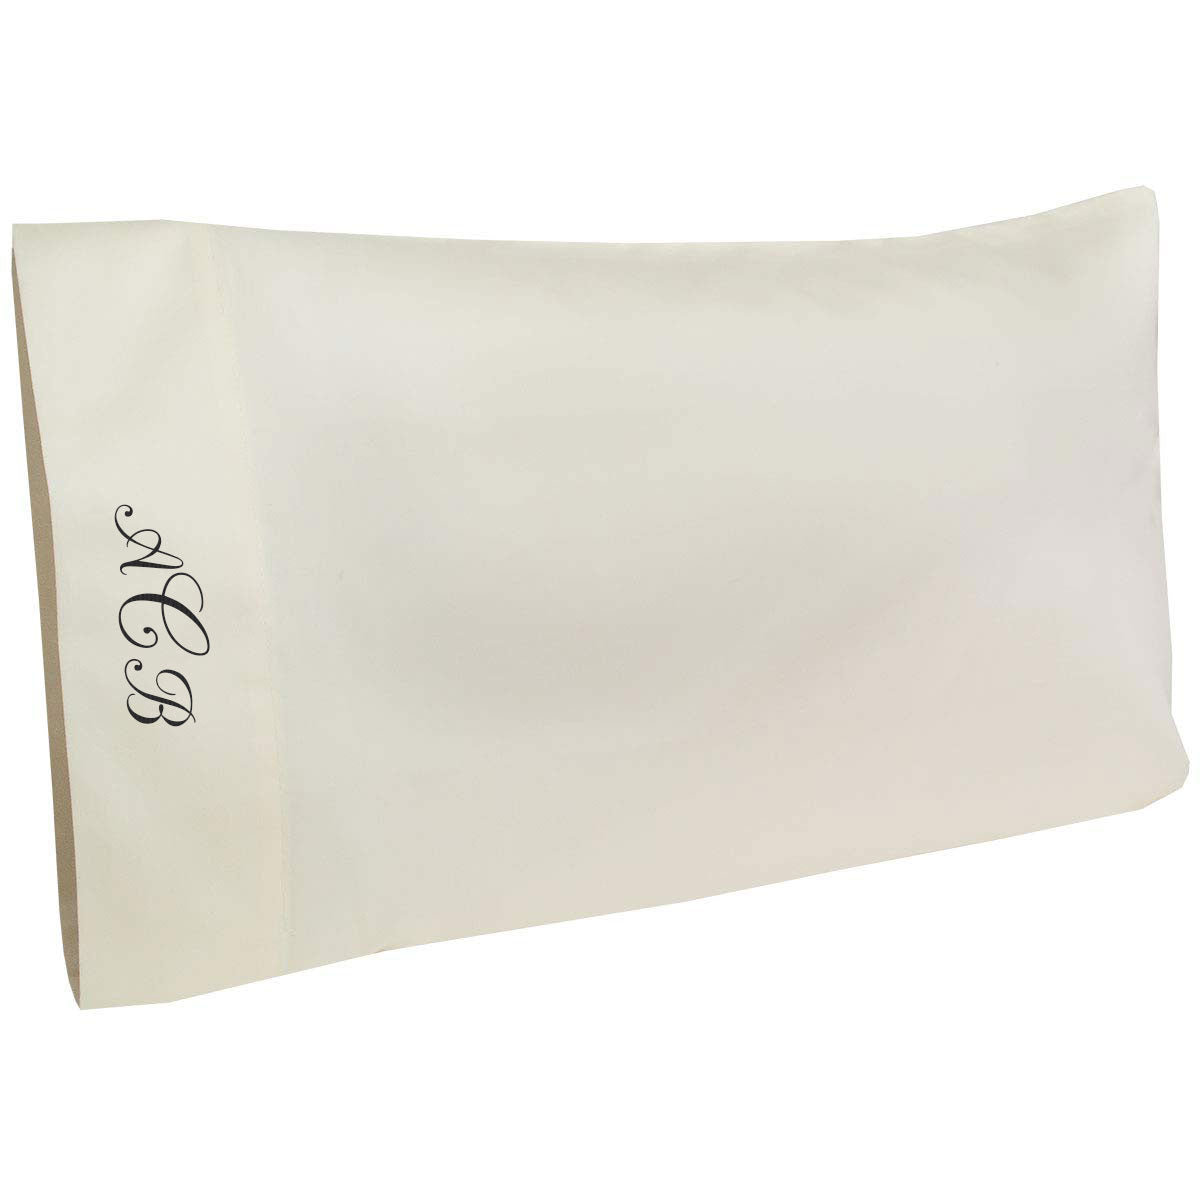 Made in the USA 100% Organic Cotton Pillowcases